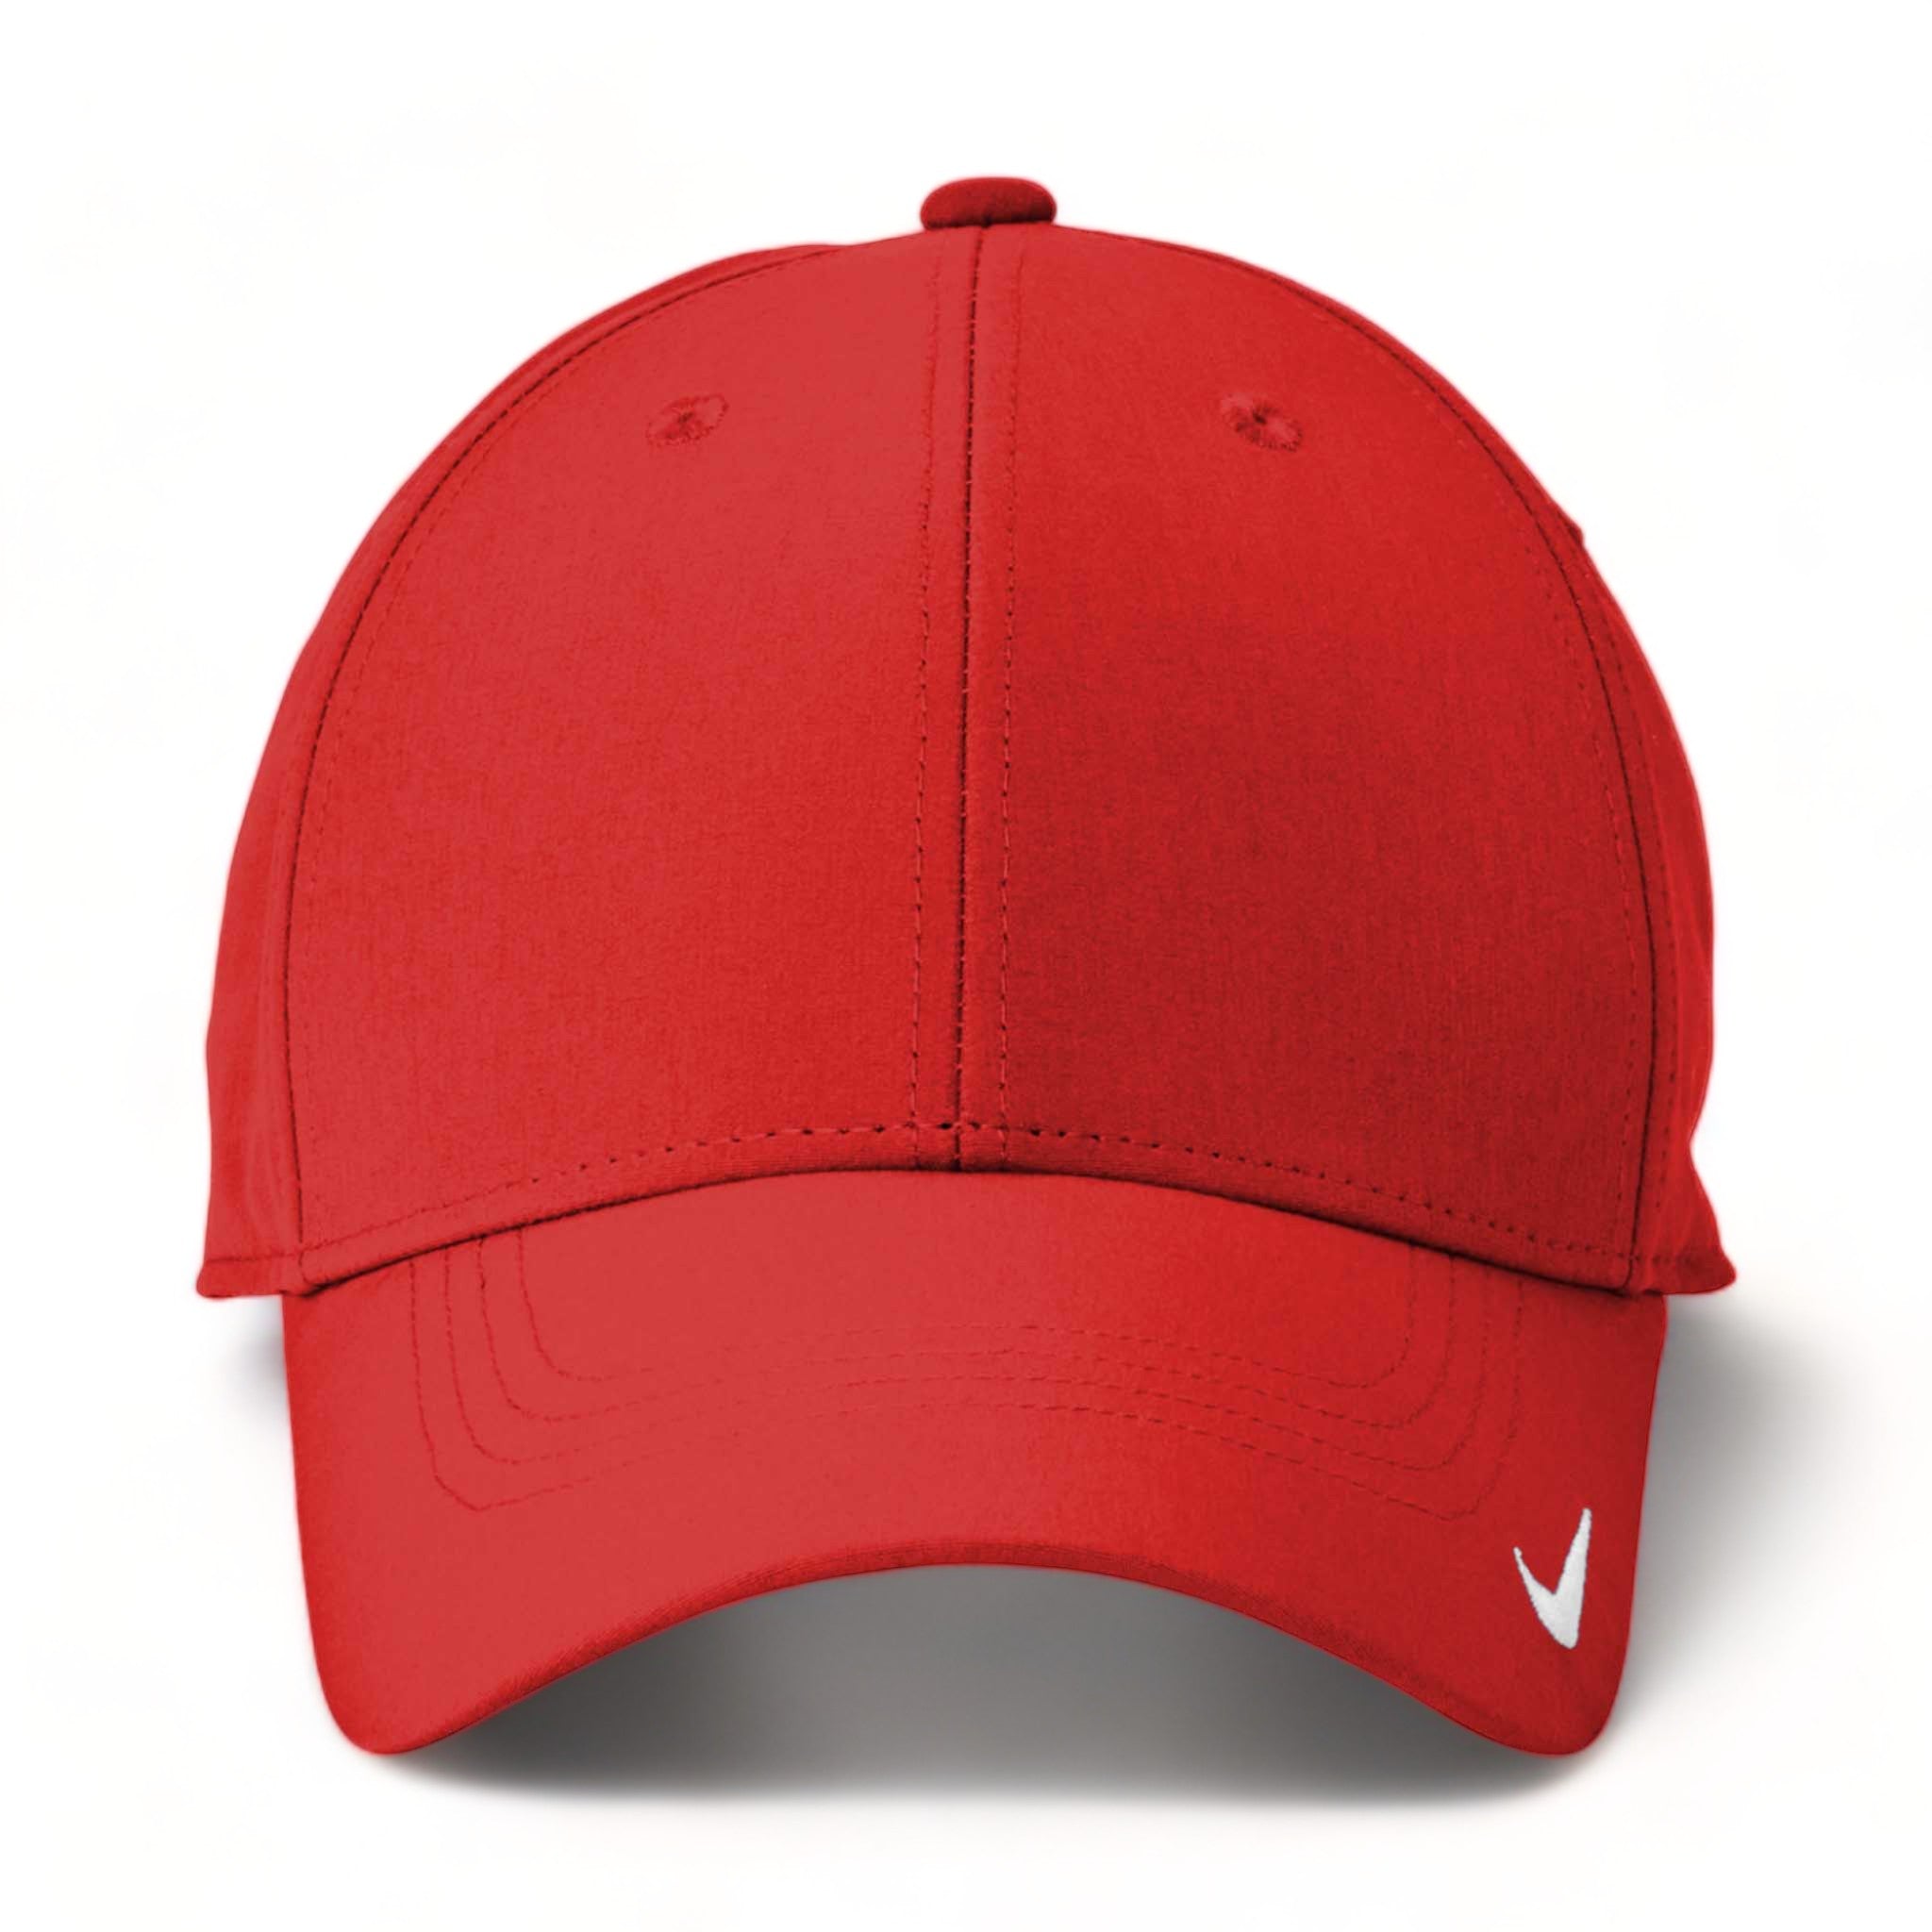 Front view of Nike NKFB6447 custom hat in university red